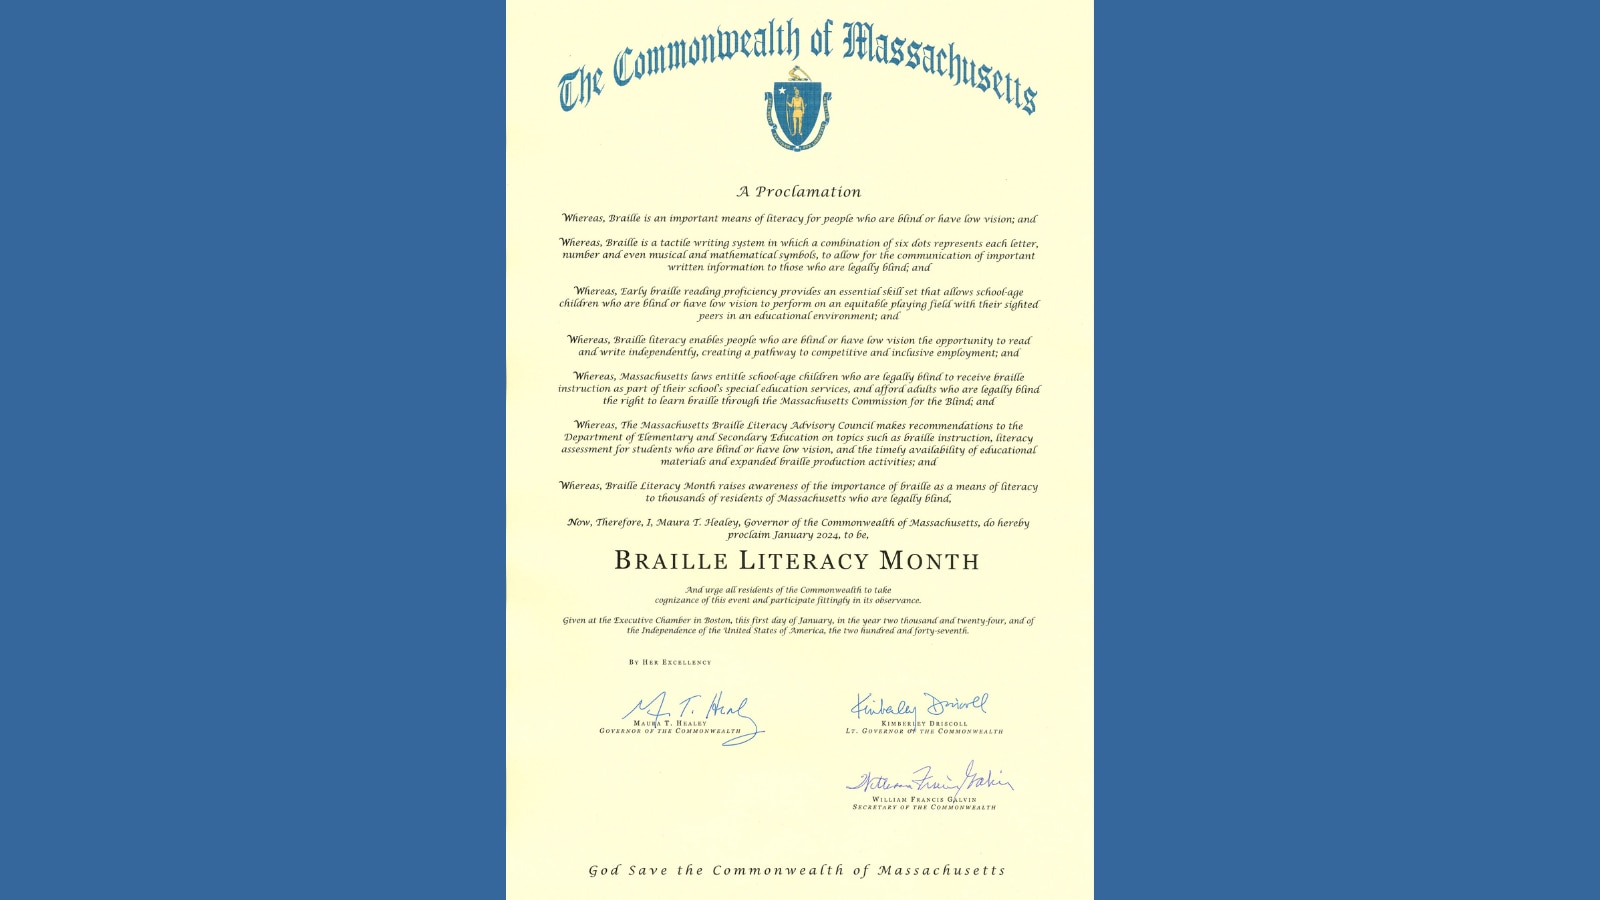 A copy of the signed Braille Literacy Month proclamation